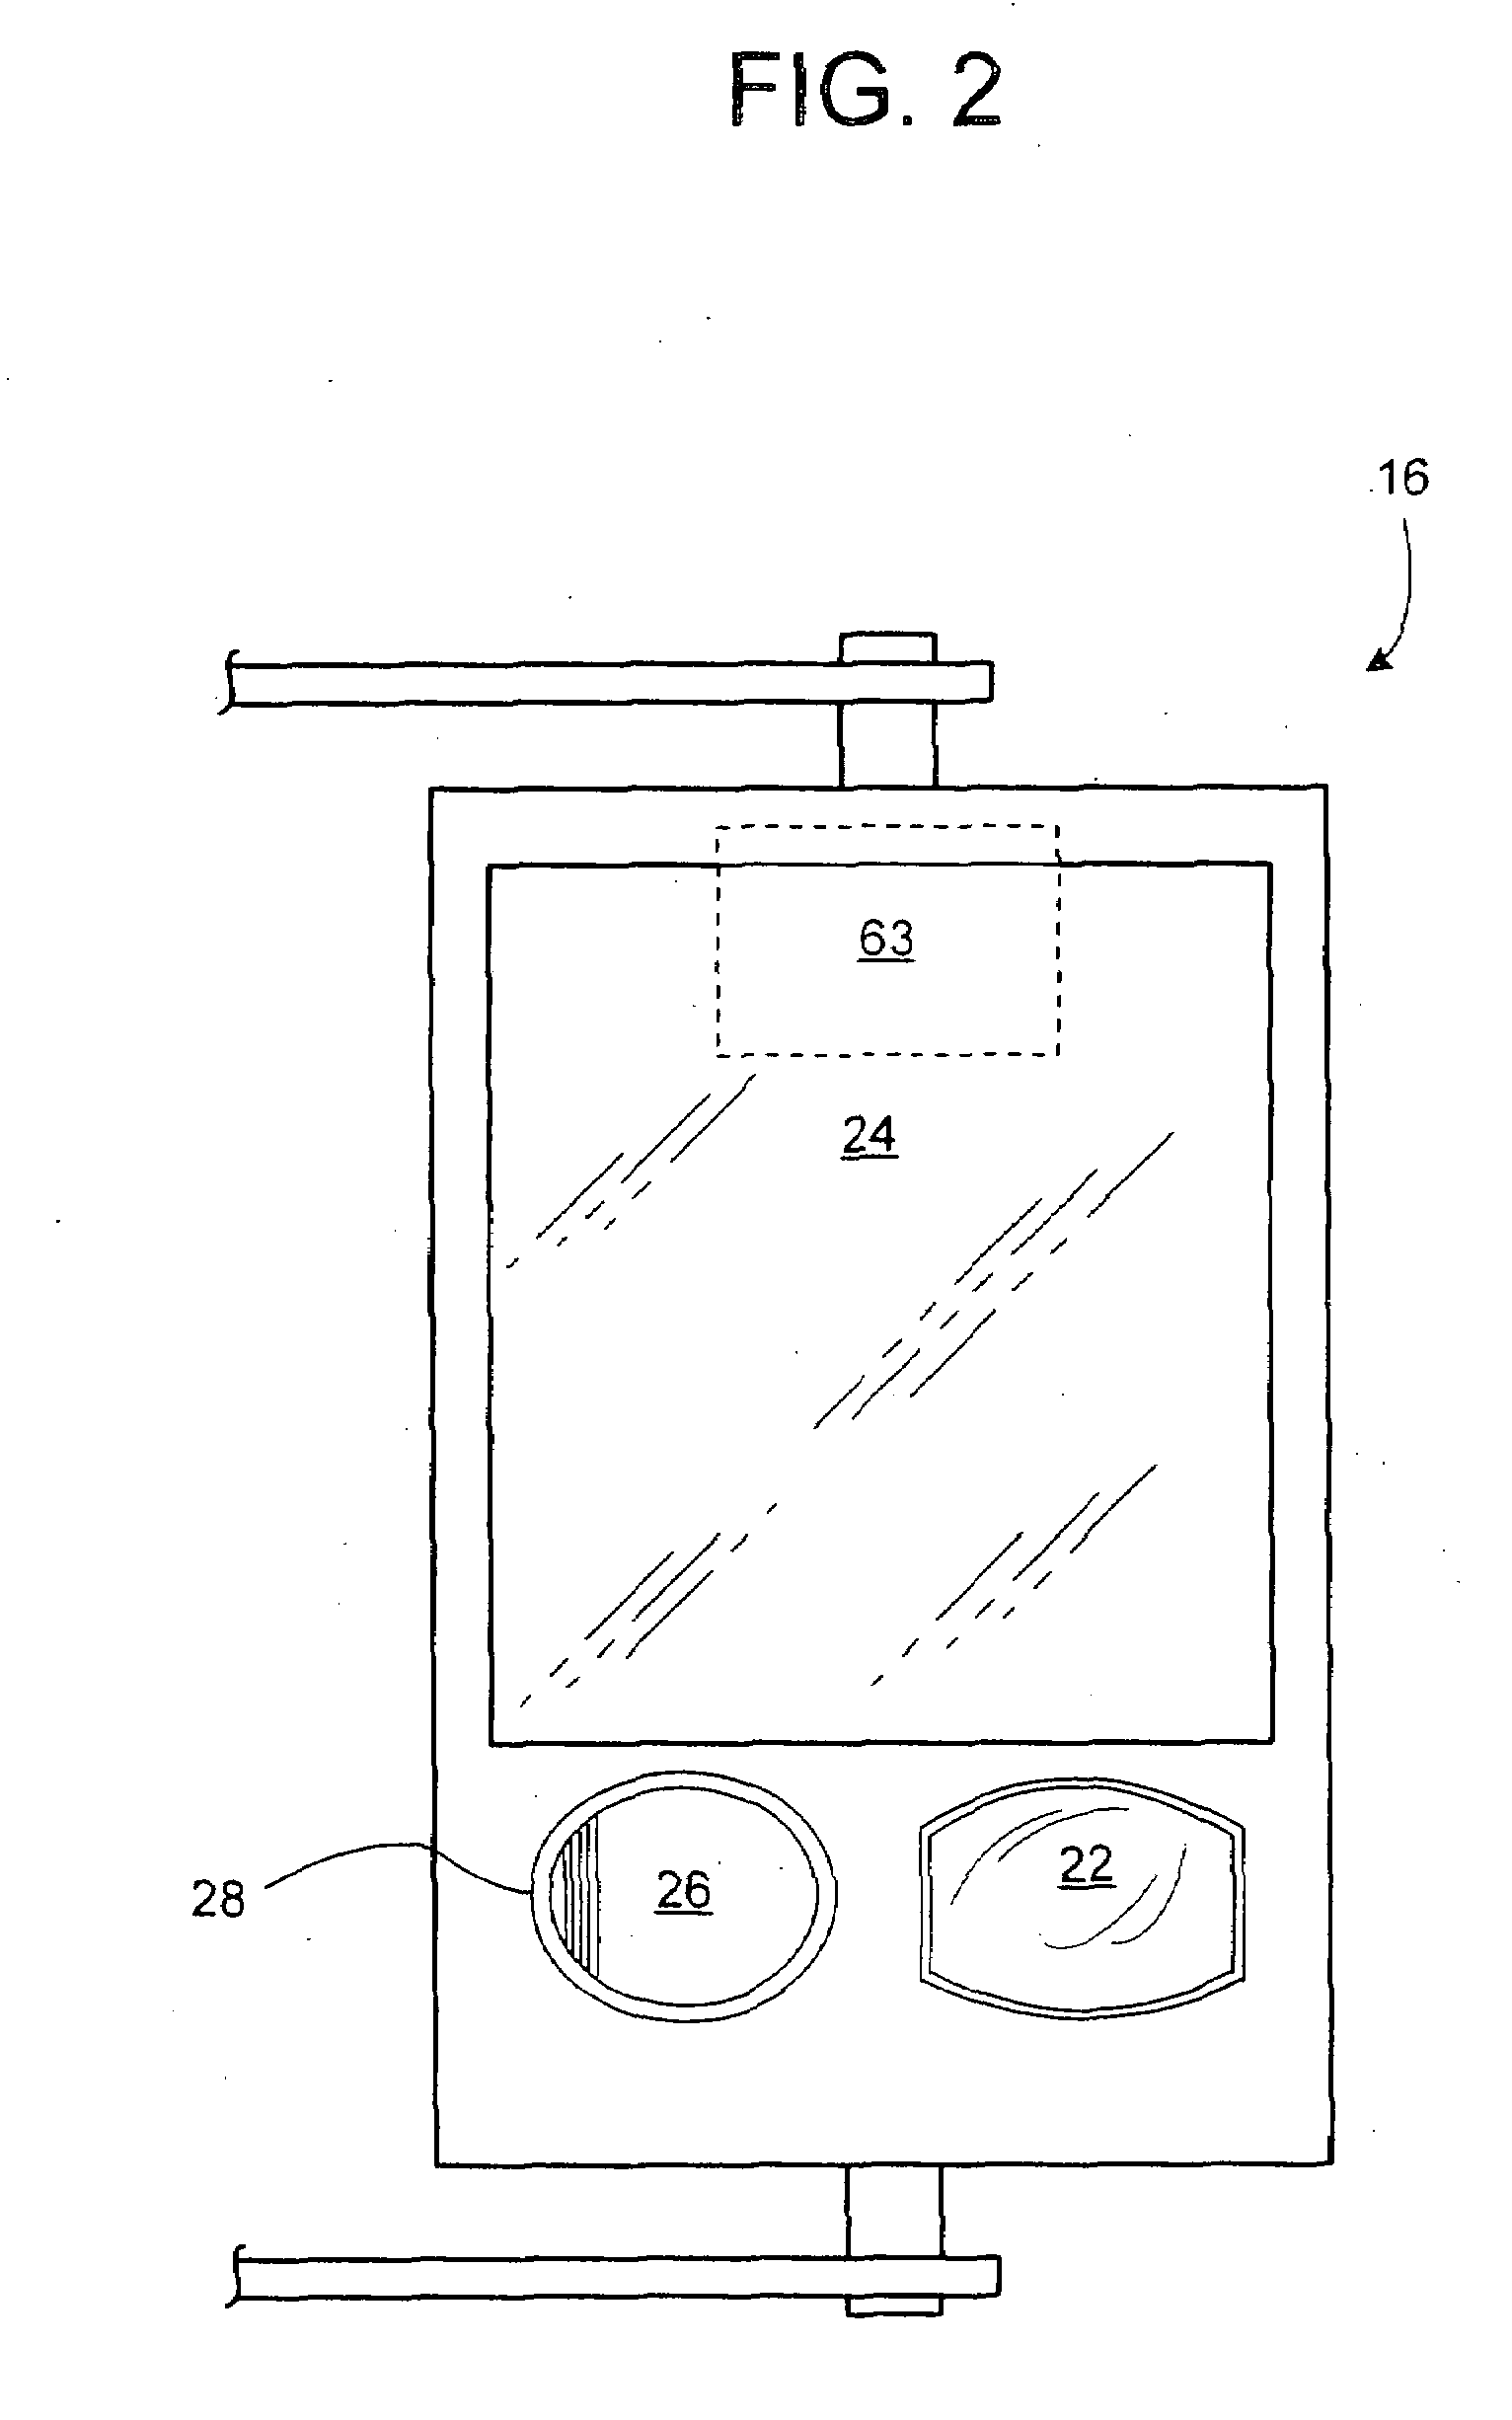 Mirror system for a trucking rig having a tractor and an articulated trailer